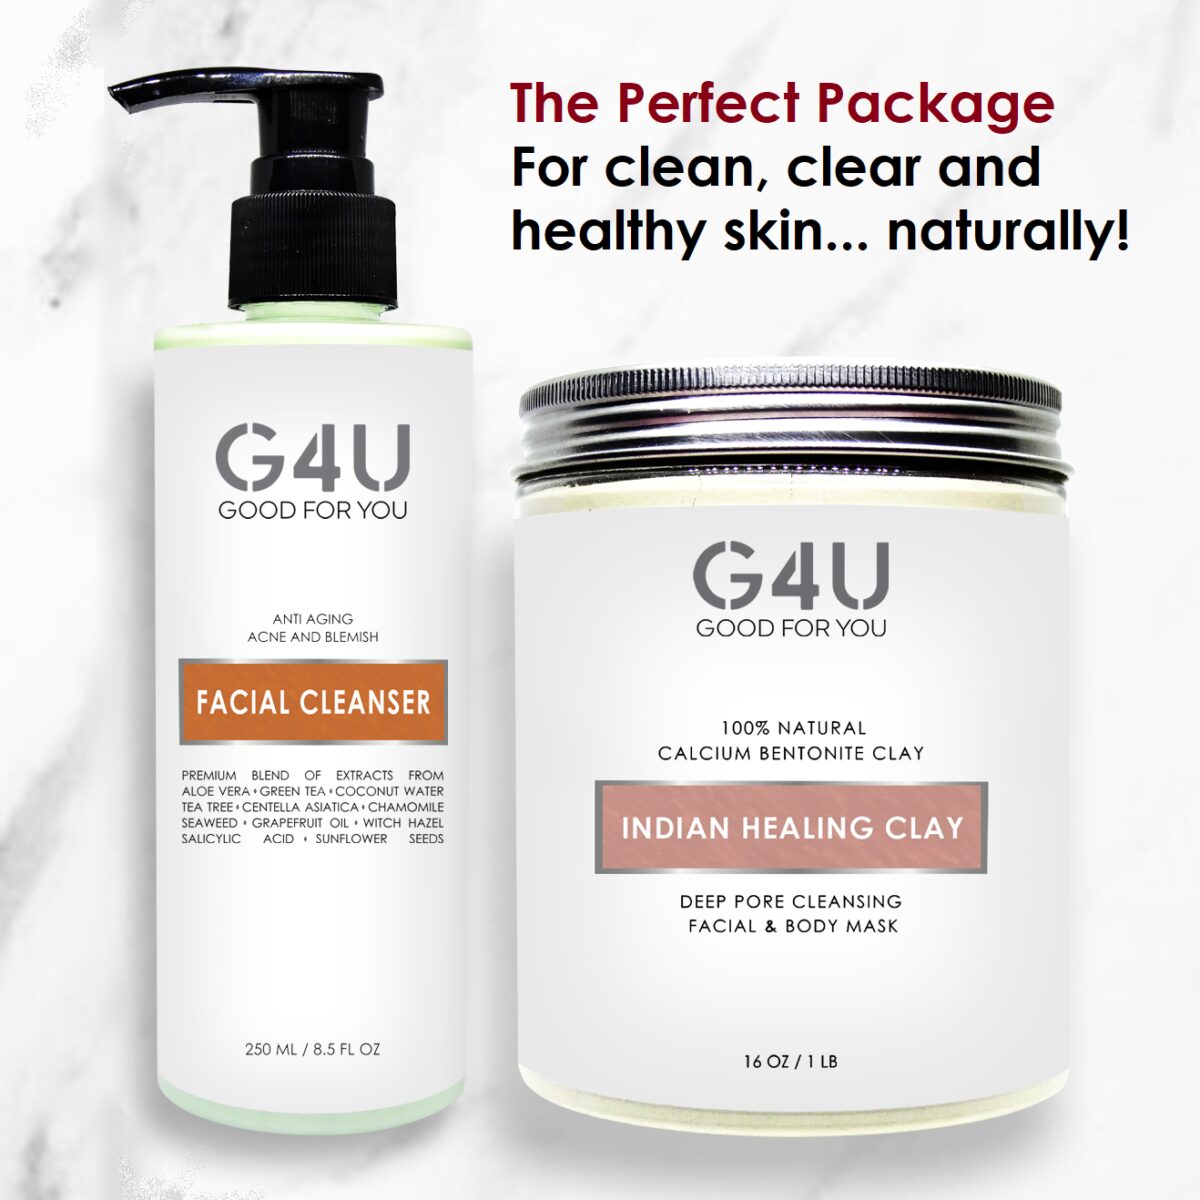 G4U Facial Cleanser and Clay Face Mask